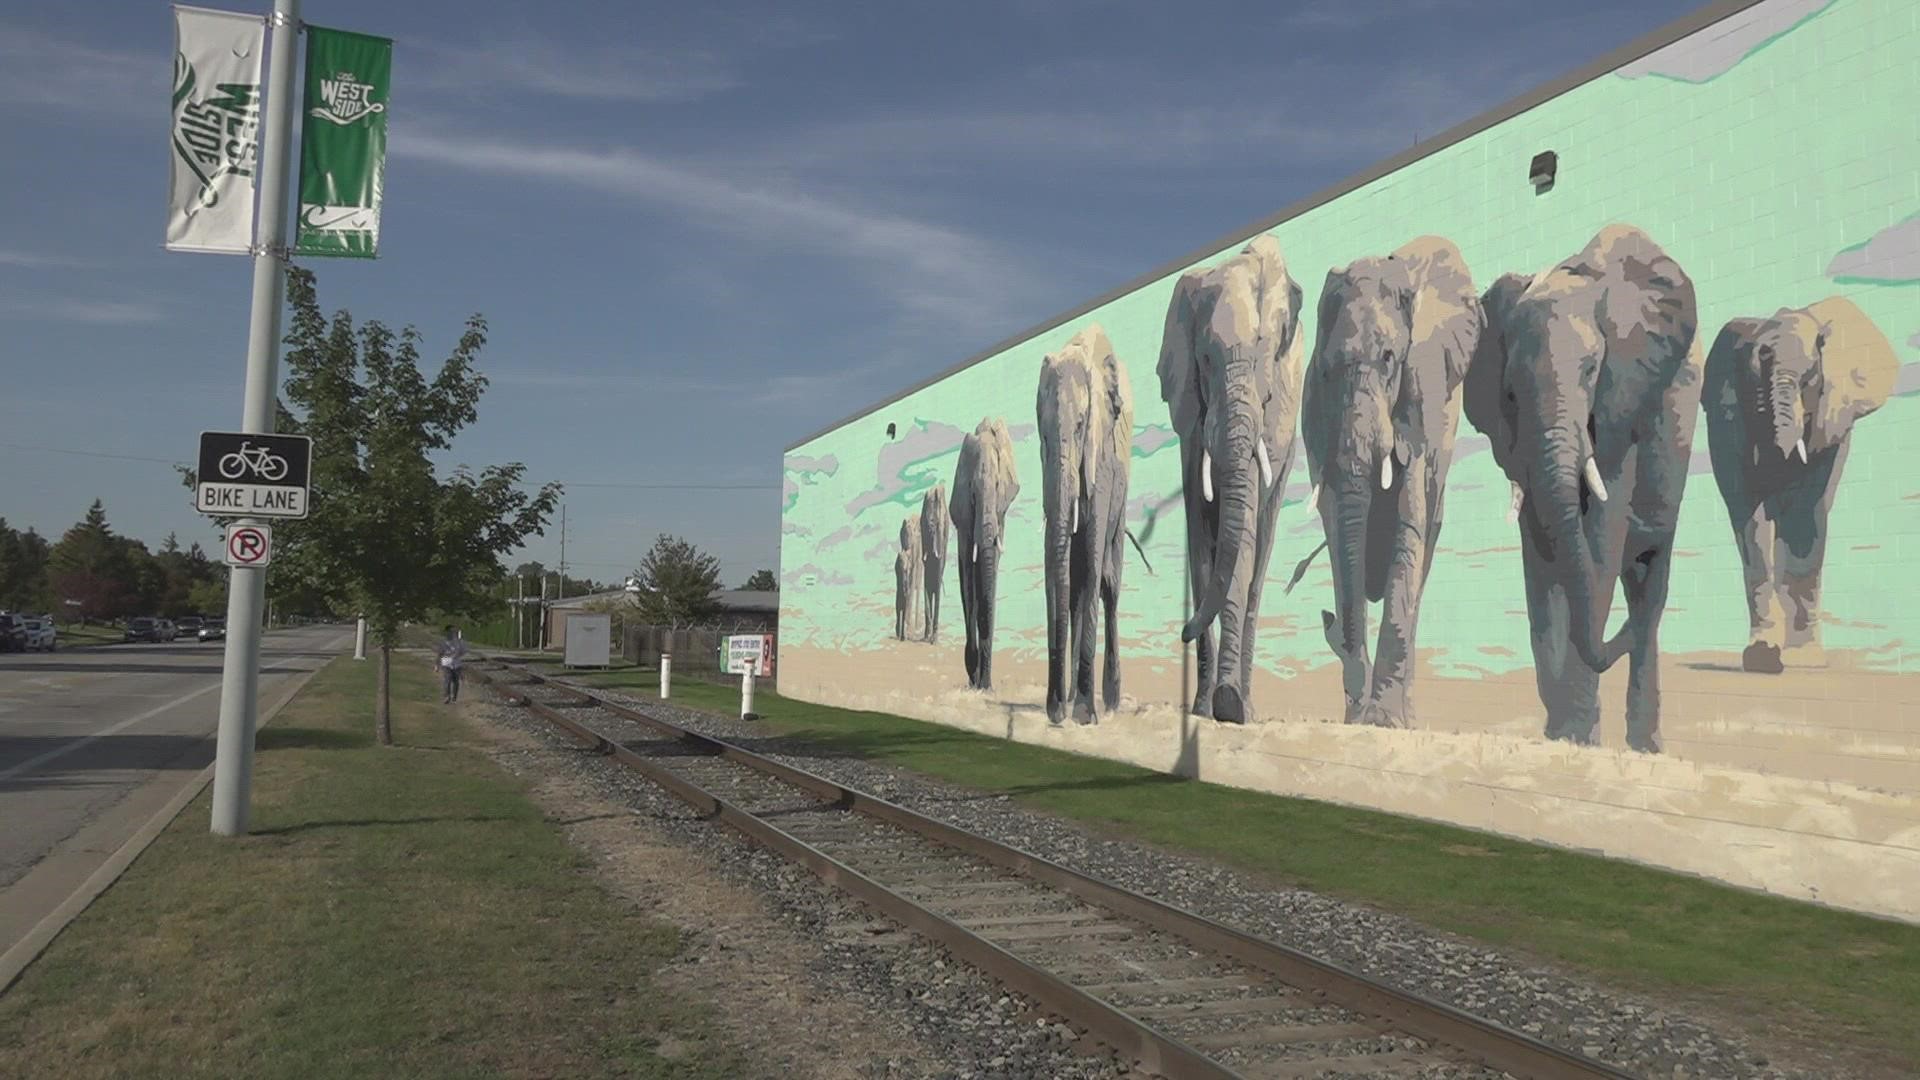 Among the most noticeable pieces is a mural featuring elephants along Seward Avenue NW called "Charging Forward."